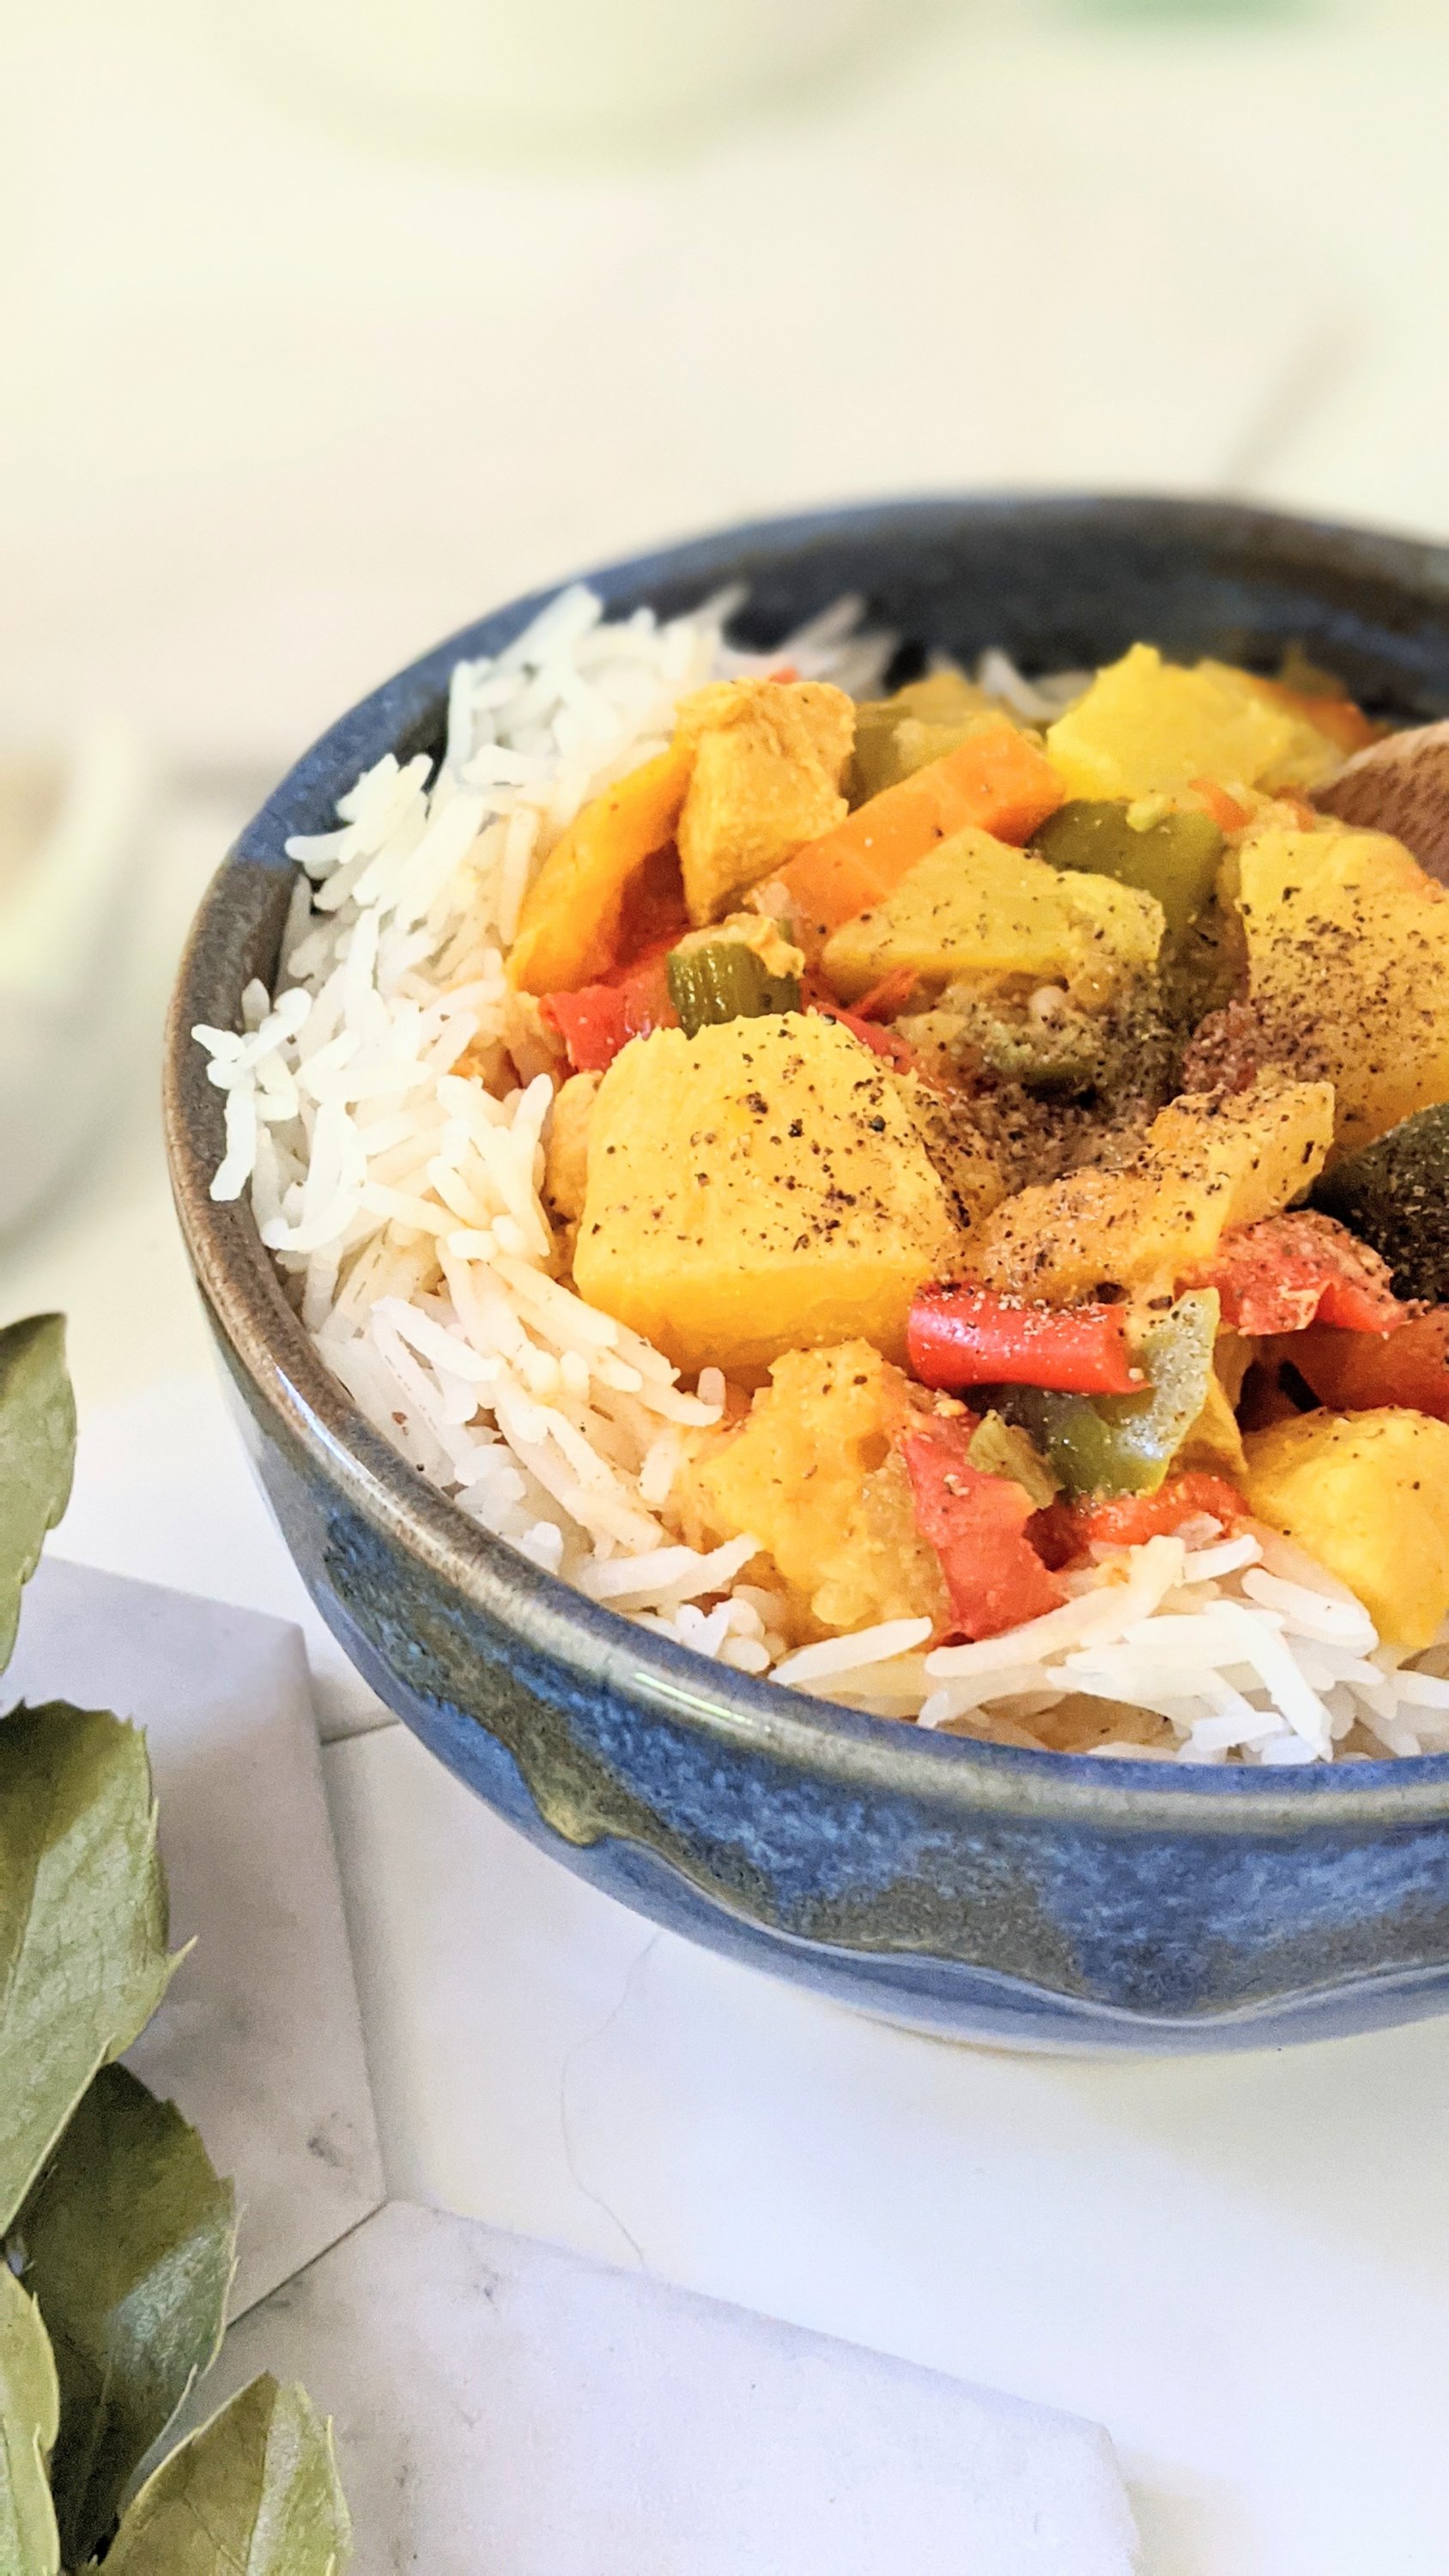 dairy free chicken pineapple curry recipe instant pot pressure cooker pineapple chicken curry meal prep recipes healthy chicken dinners to serve with rice gluten free vegetable curry with pineapple and best easy chicken breast recipes in pressure cooker